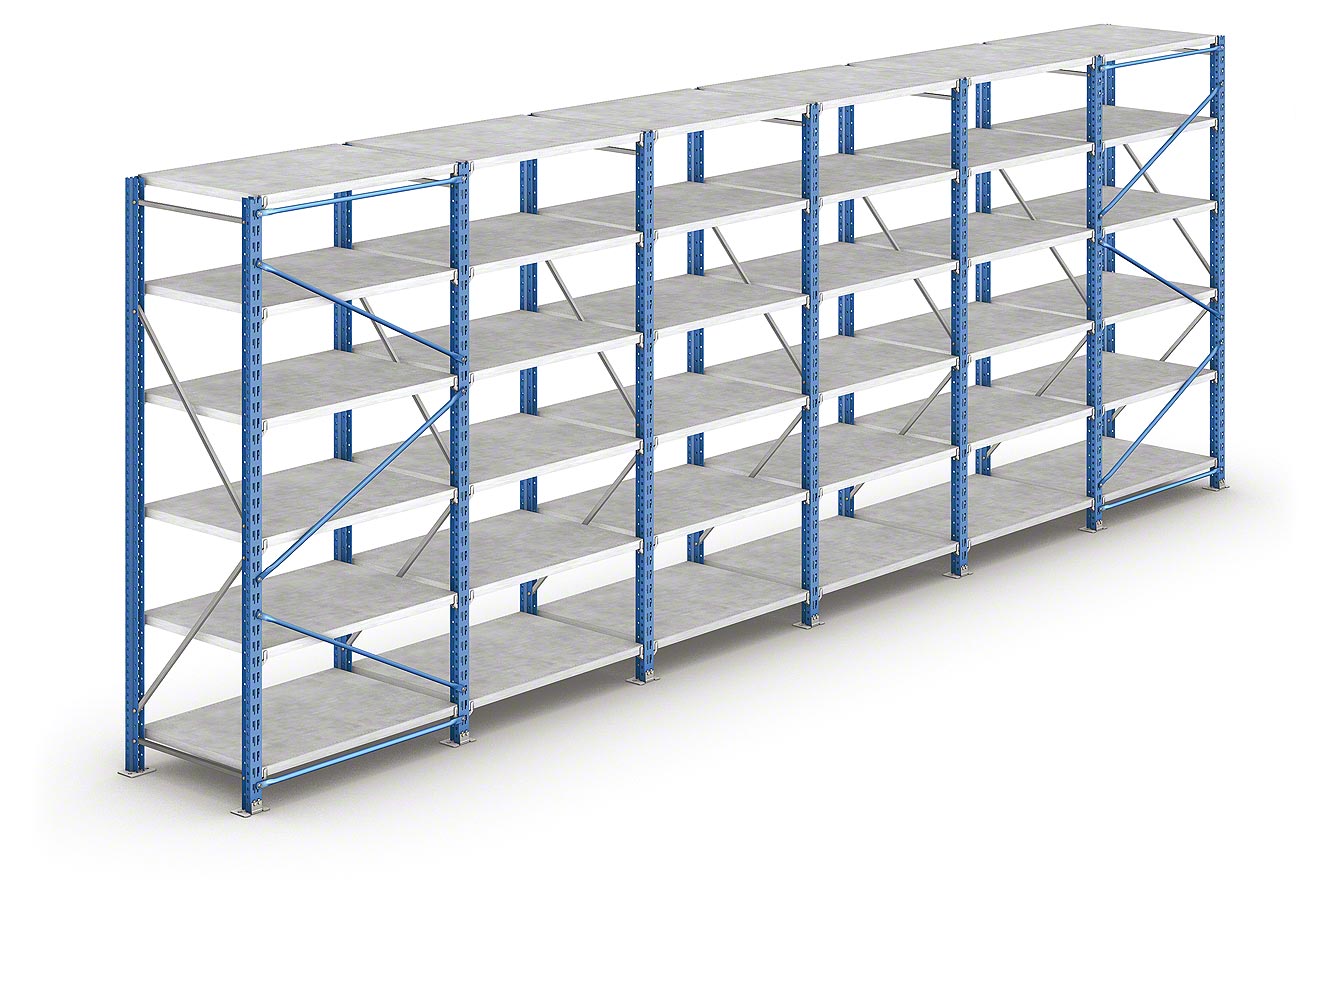 Mecalux Wide Span Shelving, Add-On Unit with Wire Decking 8'H x 8'W x 24''D, 3 Shelf Levels